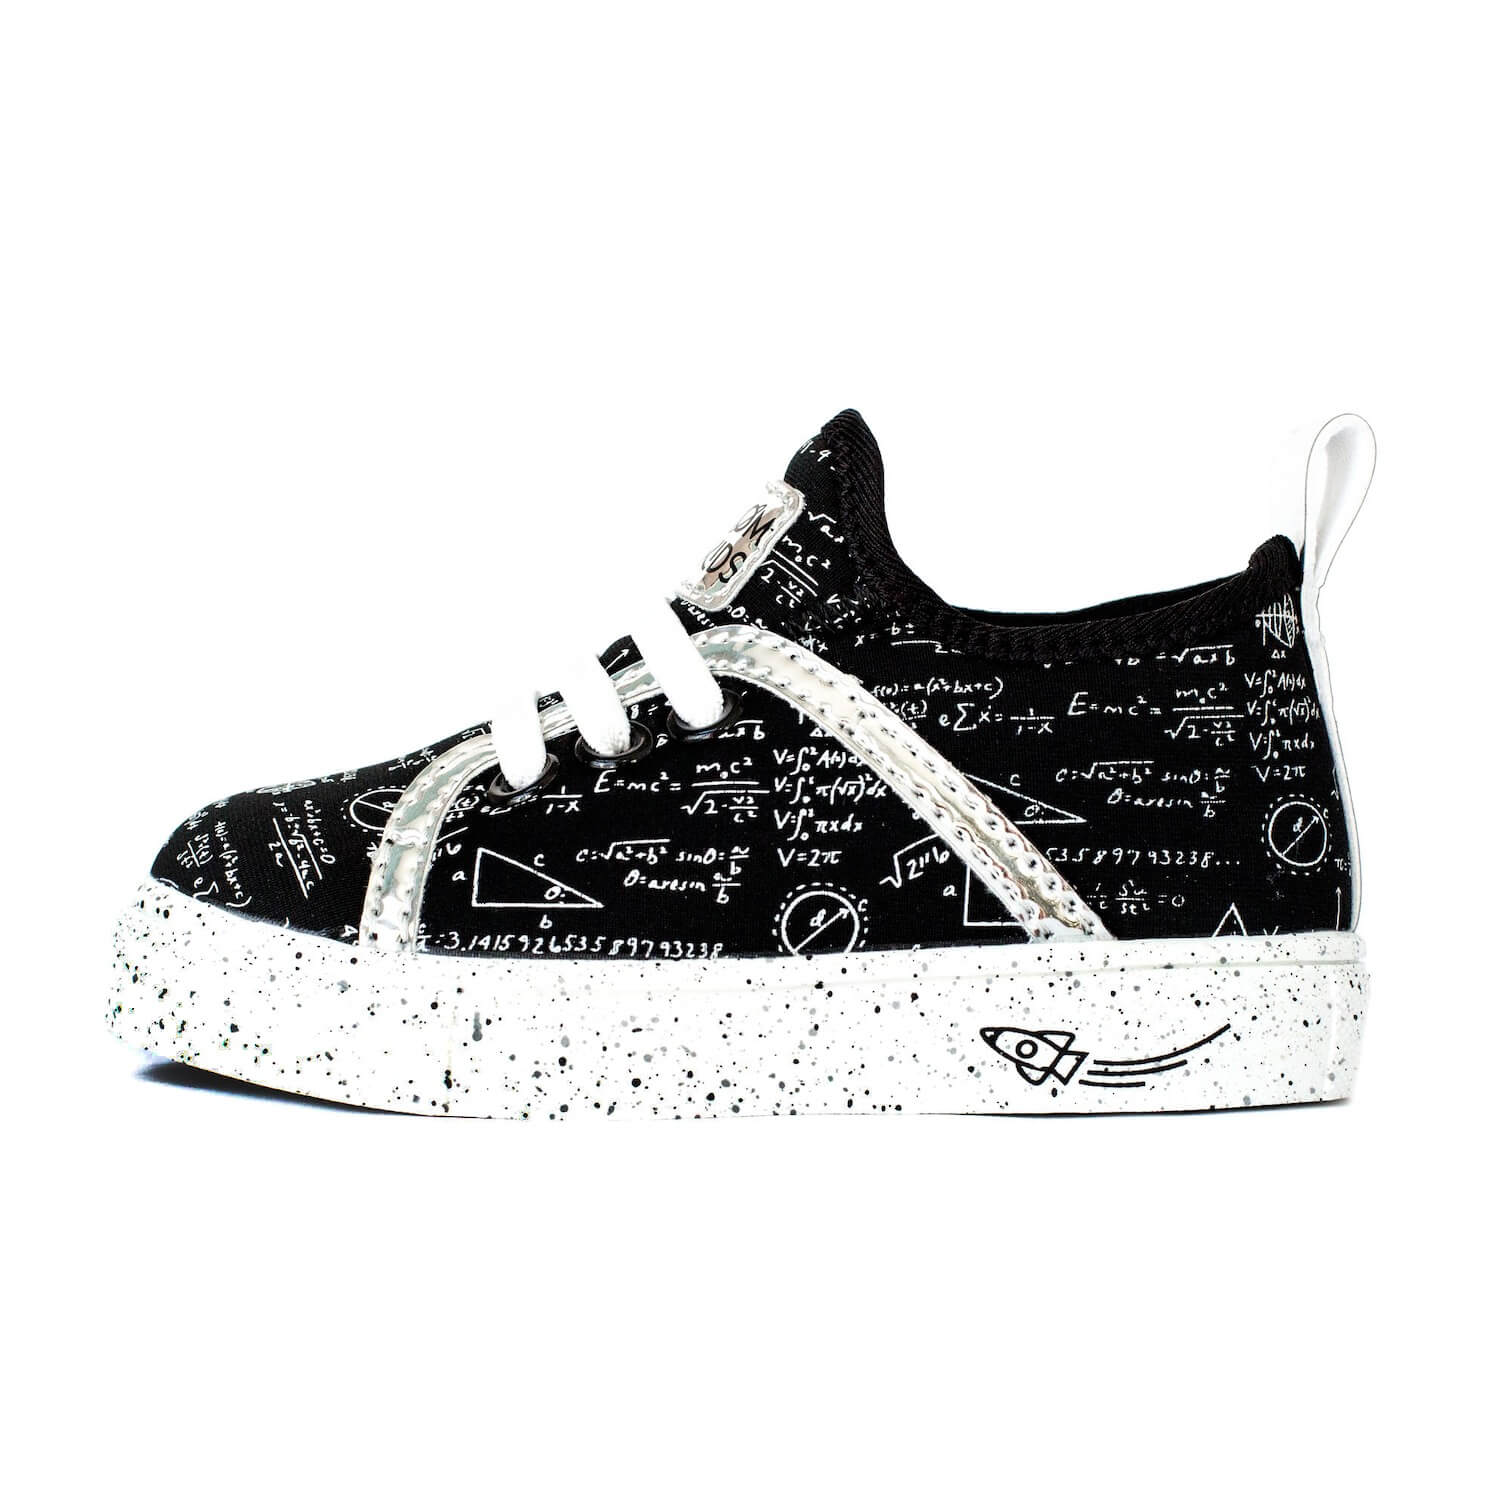 Black and white boys youth shoe illustrating math design and white speckled soles - perfect shoes for Summer or back to school